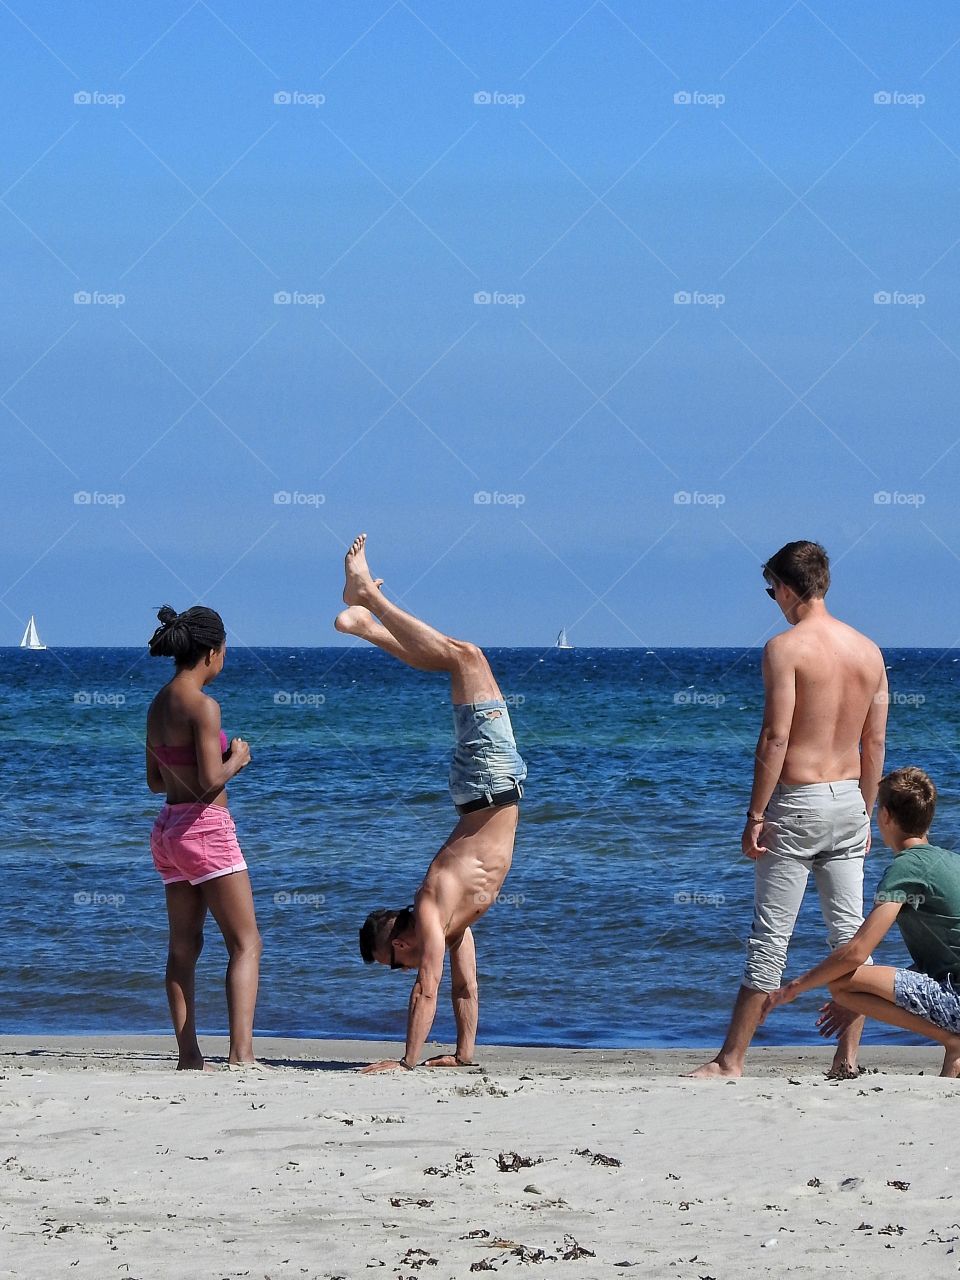 Hand stand on the beach